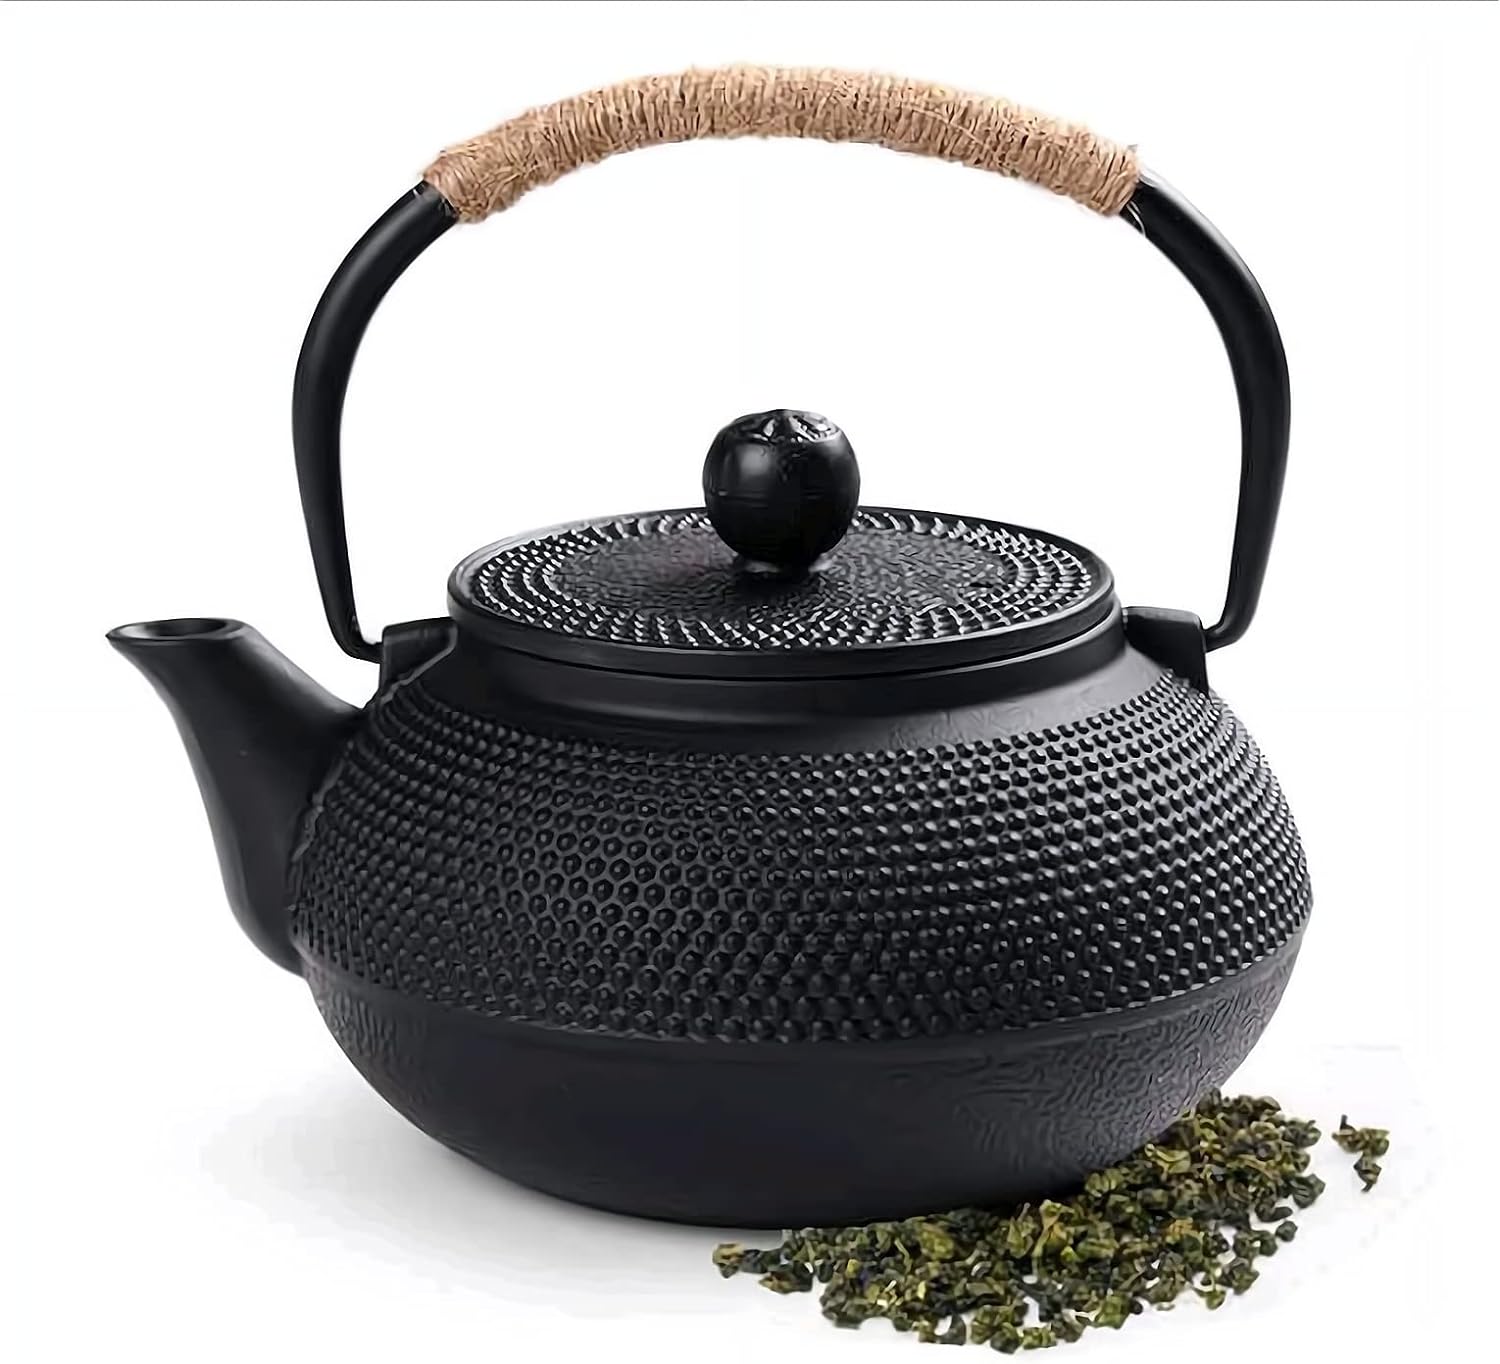 LMA Oriental Ceramic Tea Pot with Stainless Steel Infuser - 0.9 L